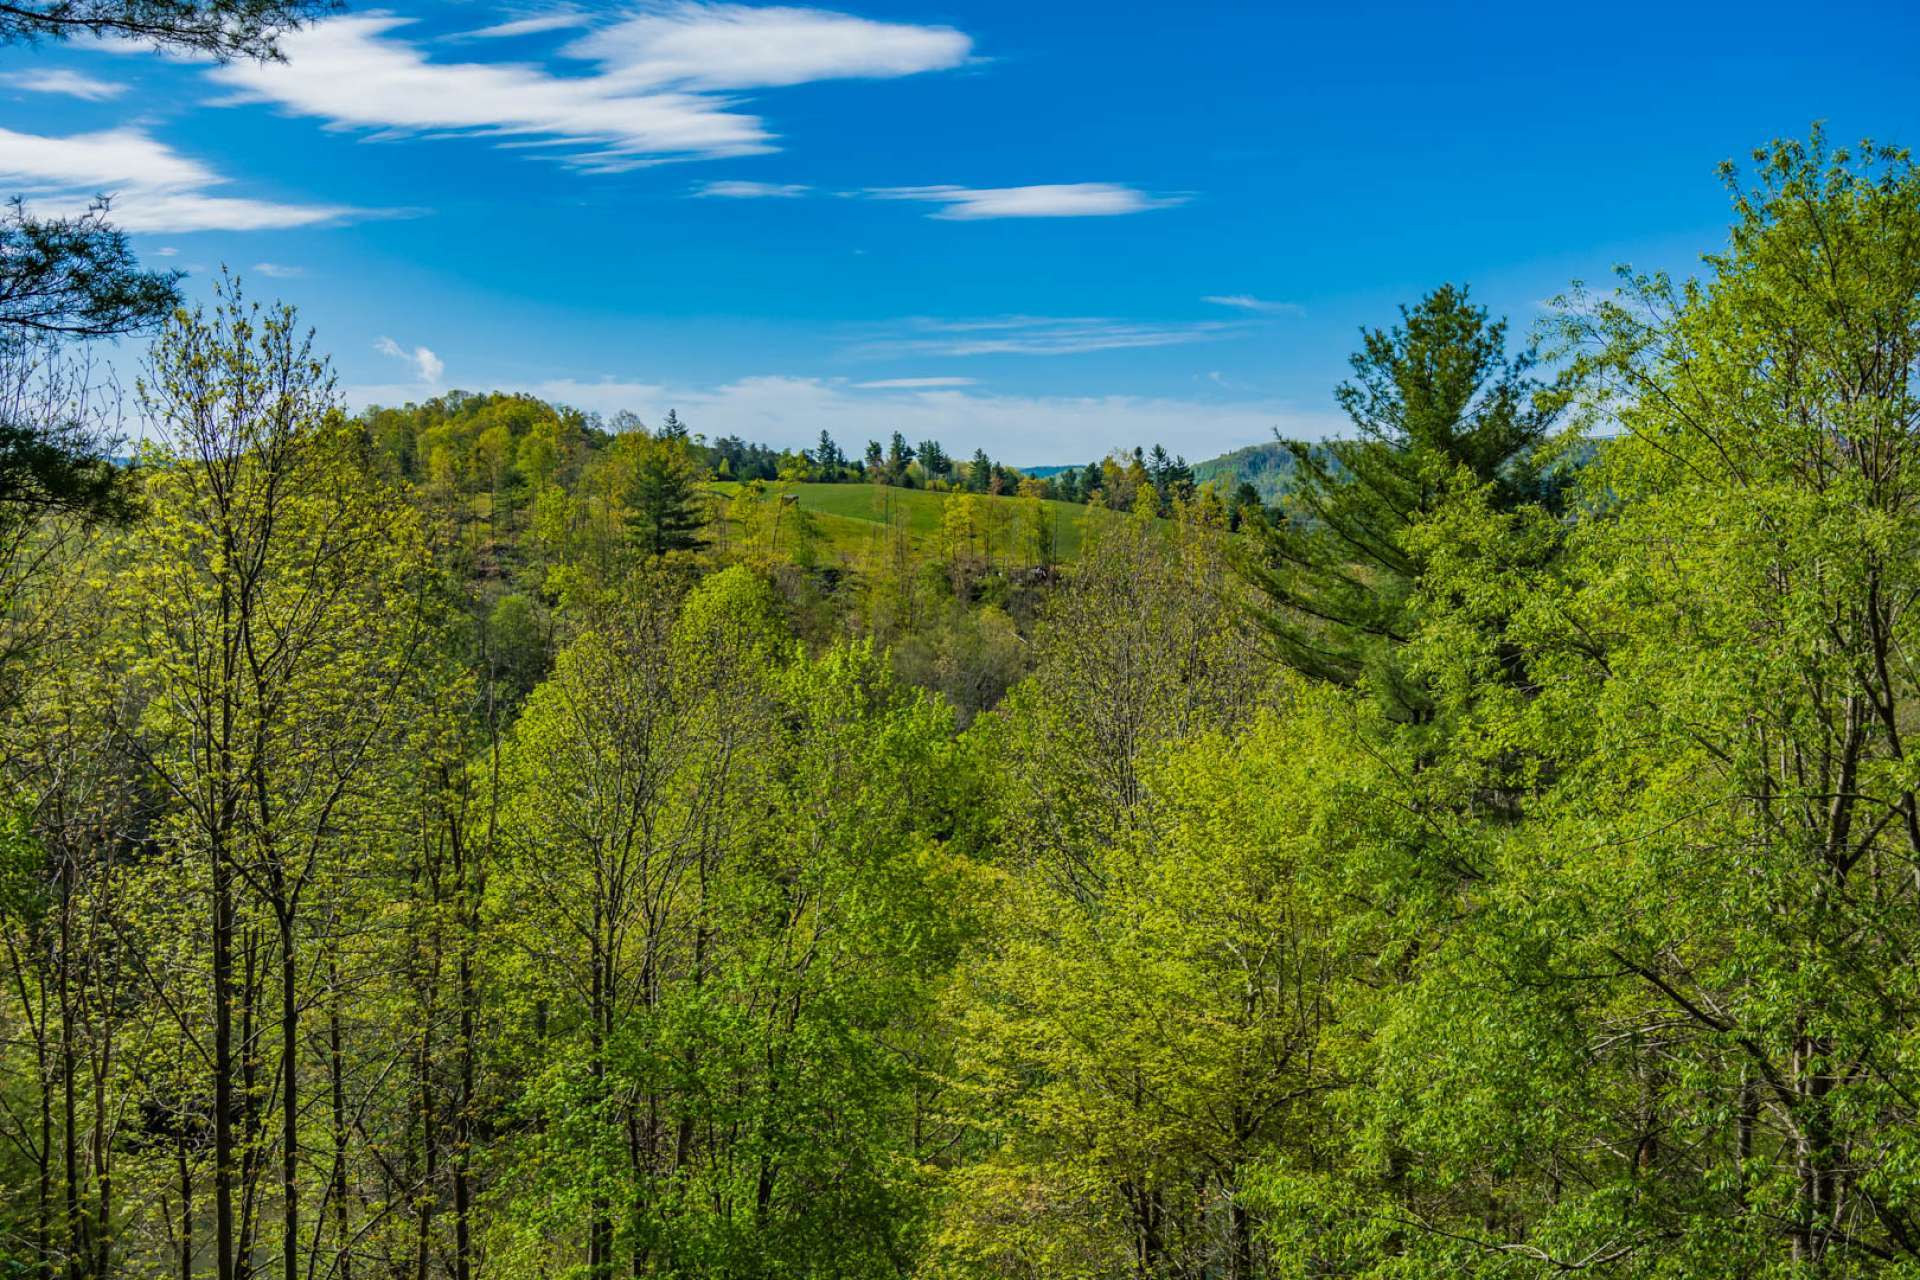 Enjoy the pristine setting surrounding you that includes trees, pastures, and the Blue Ridge Mountains beyond while relaxing on the covered deck with the sounds of the New River below.